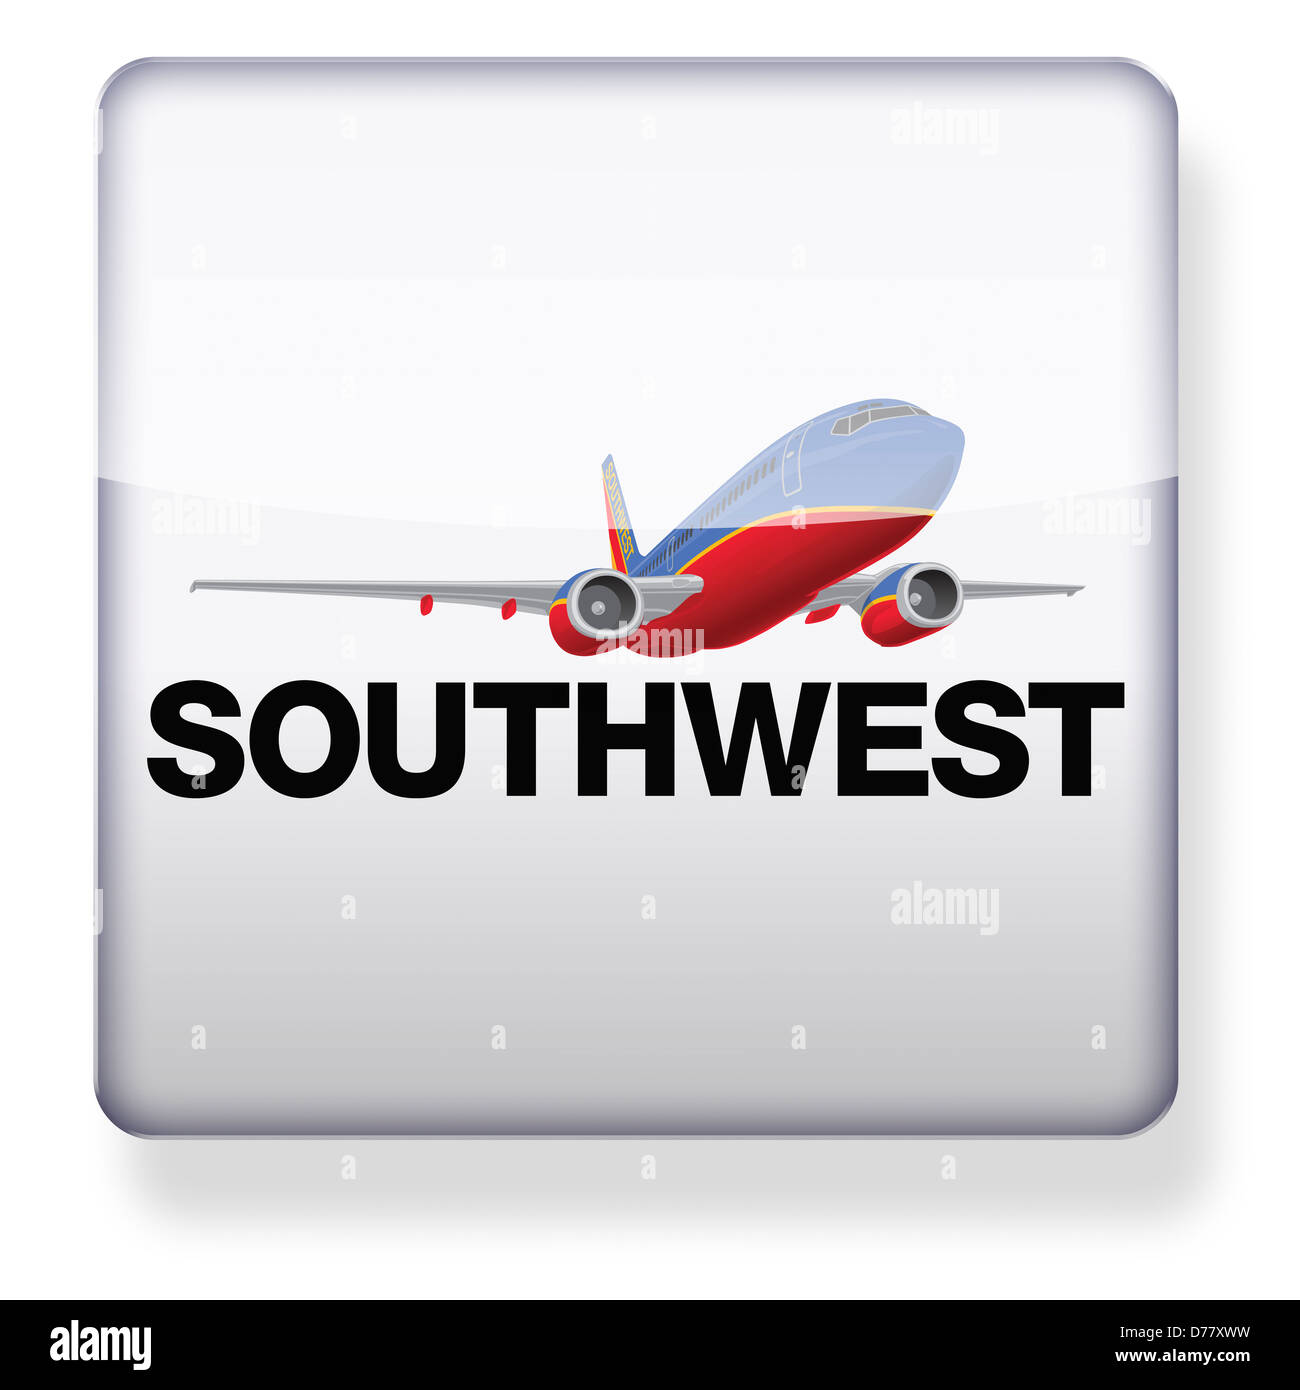 Southwest airlines logo as an app icon. Clipping path included. Stock Photo